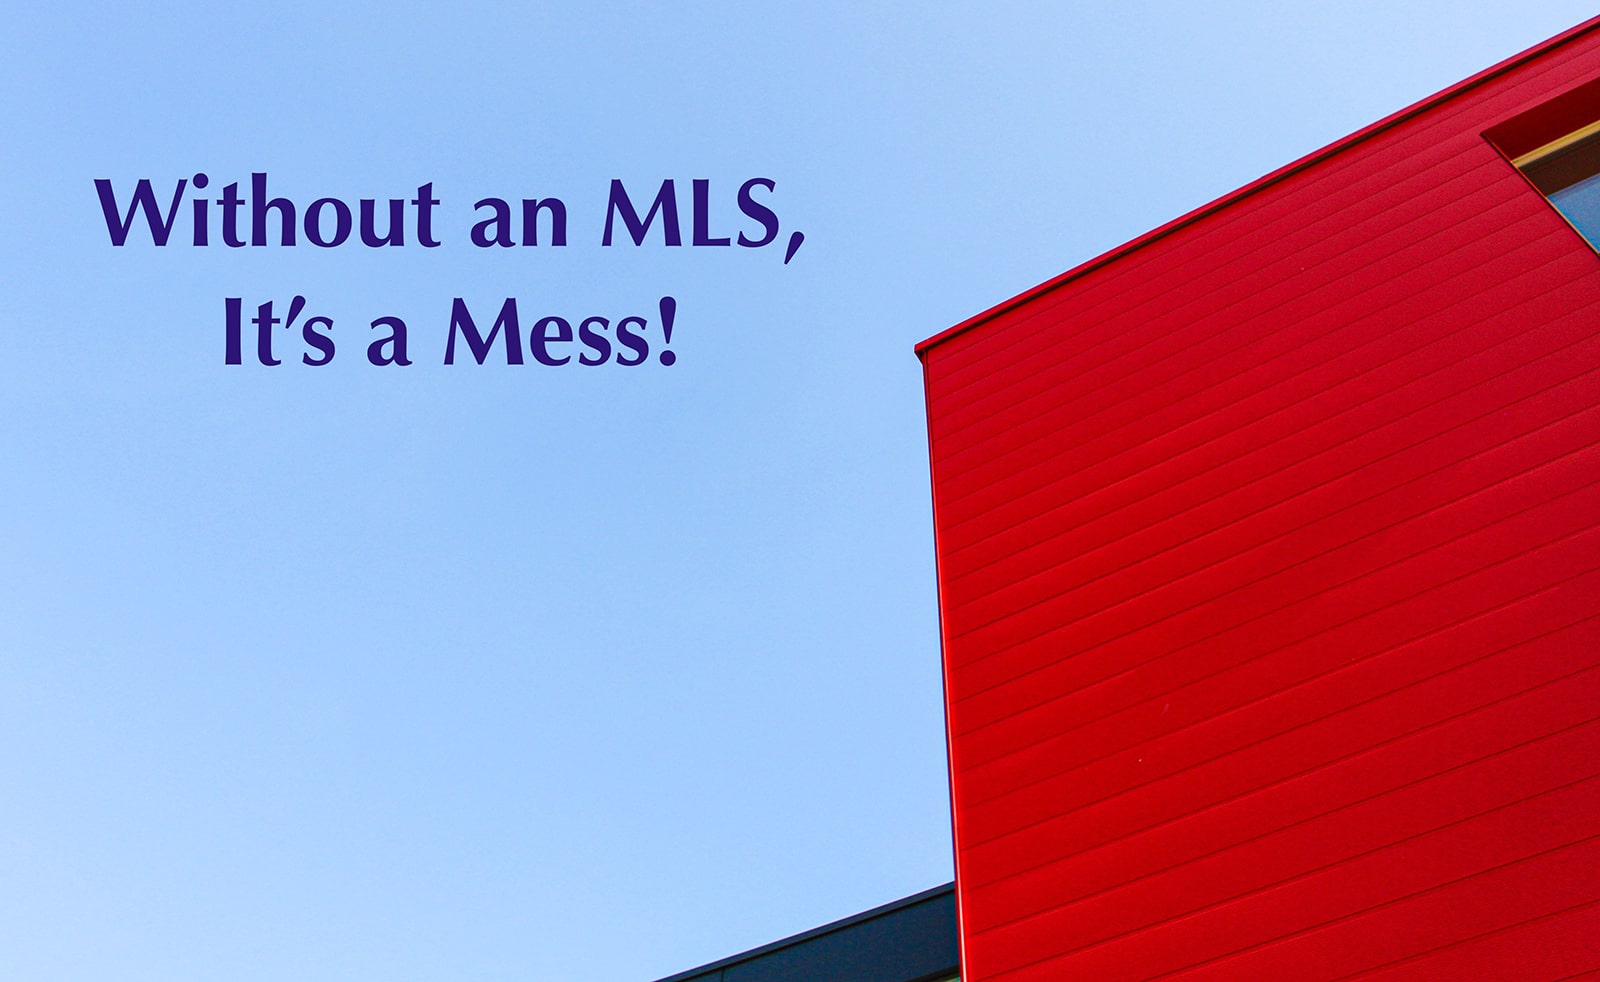 Without an MLS, it's a Mess